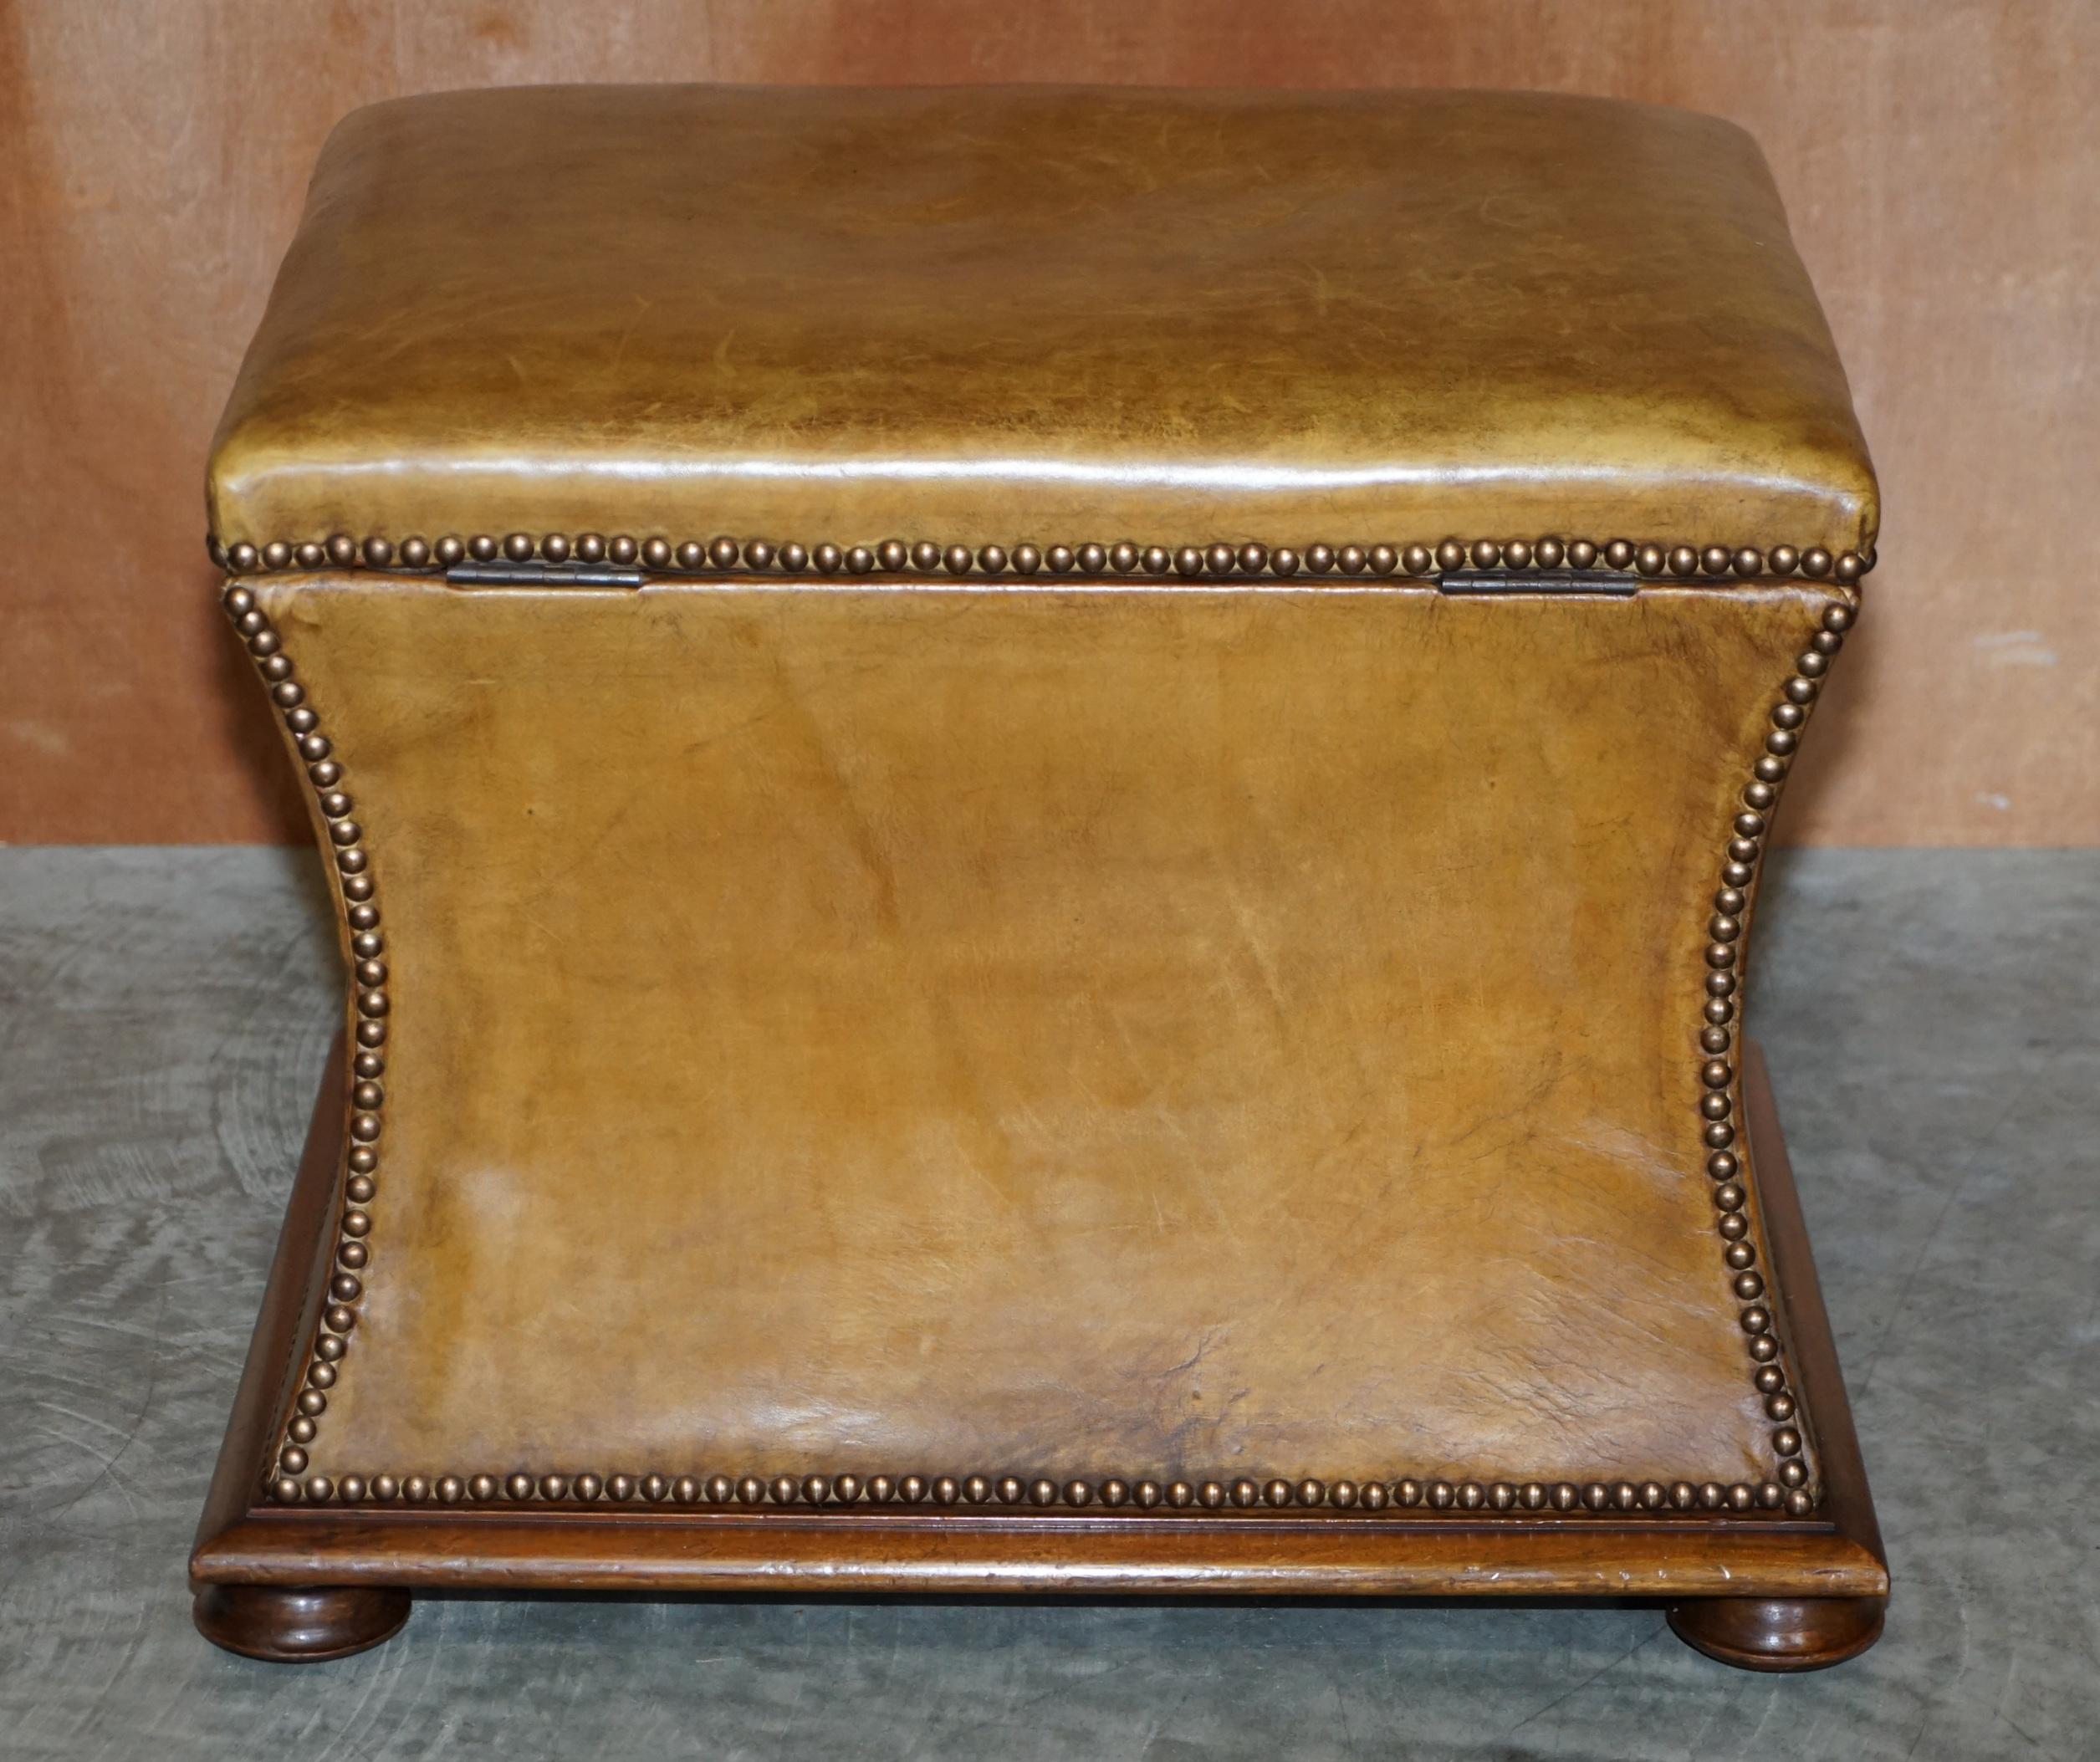 Exquisite Victorian circa 1860 Tan Brown Leather Ottoman Stool Footstool Storage For Sale 1